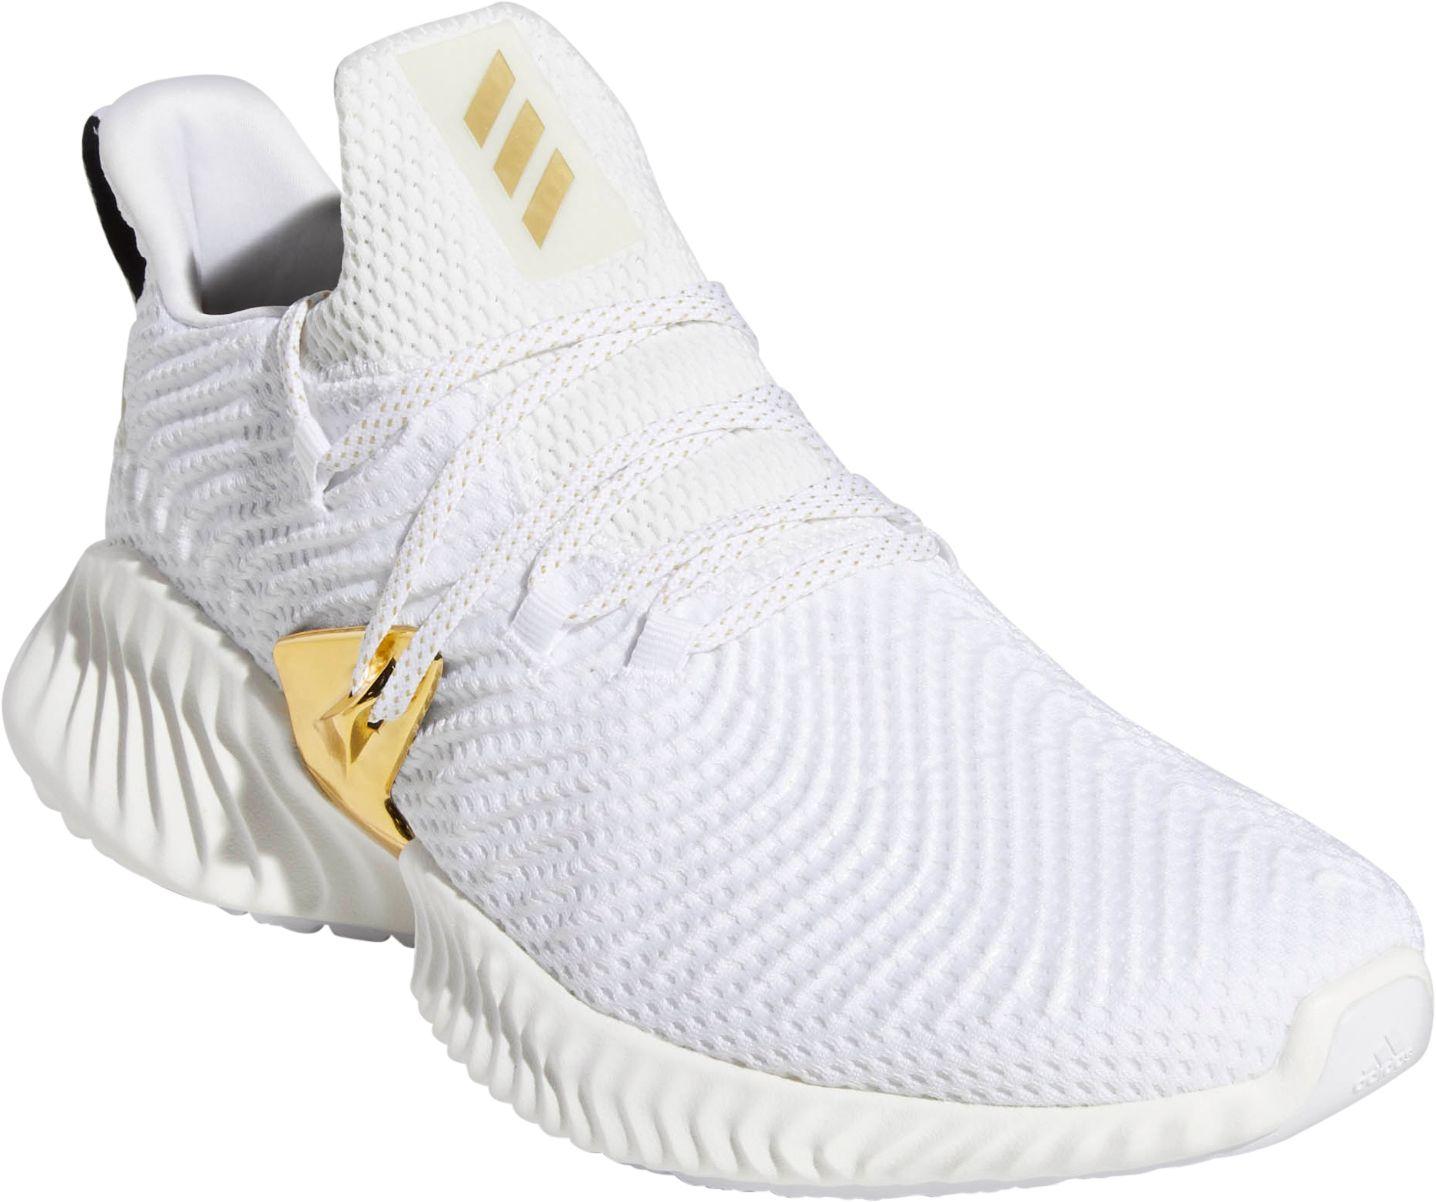 Alphabounce Instinct White Gold Outlet Shop, UP TO 68% OFF